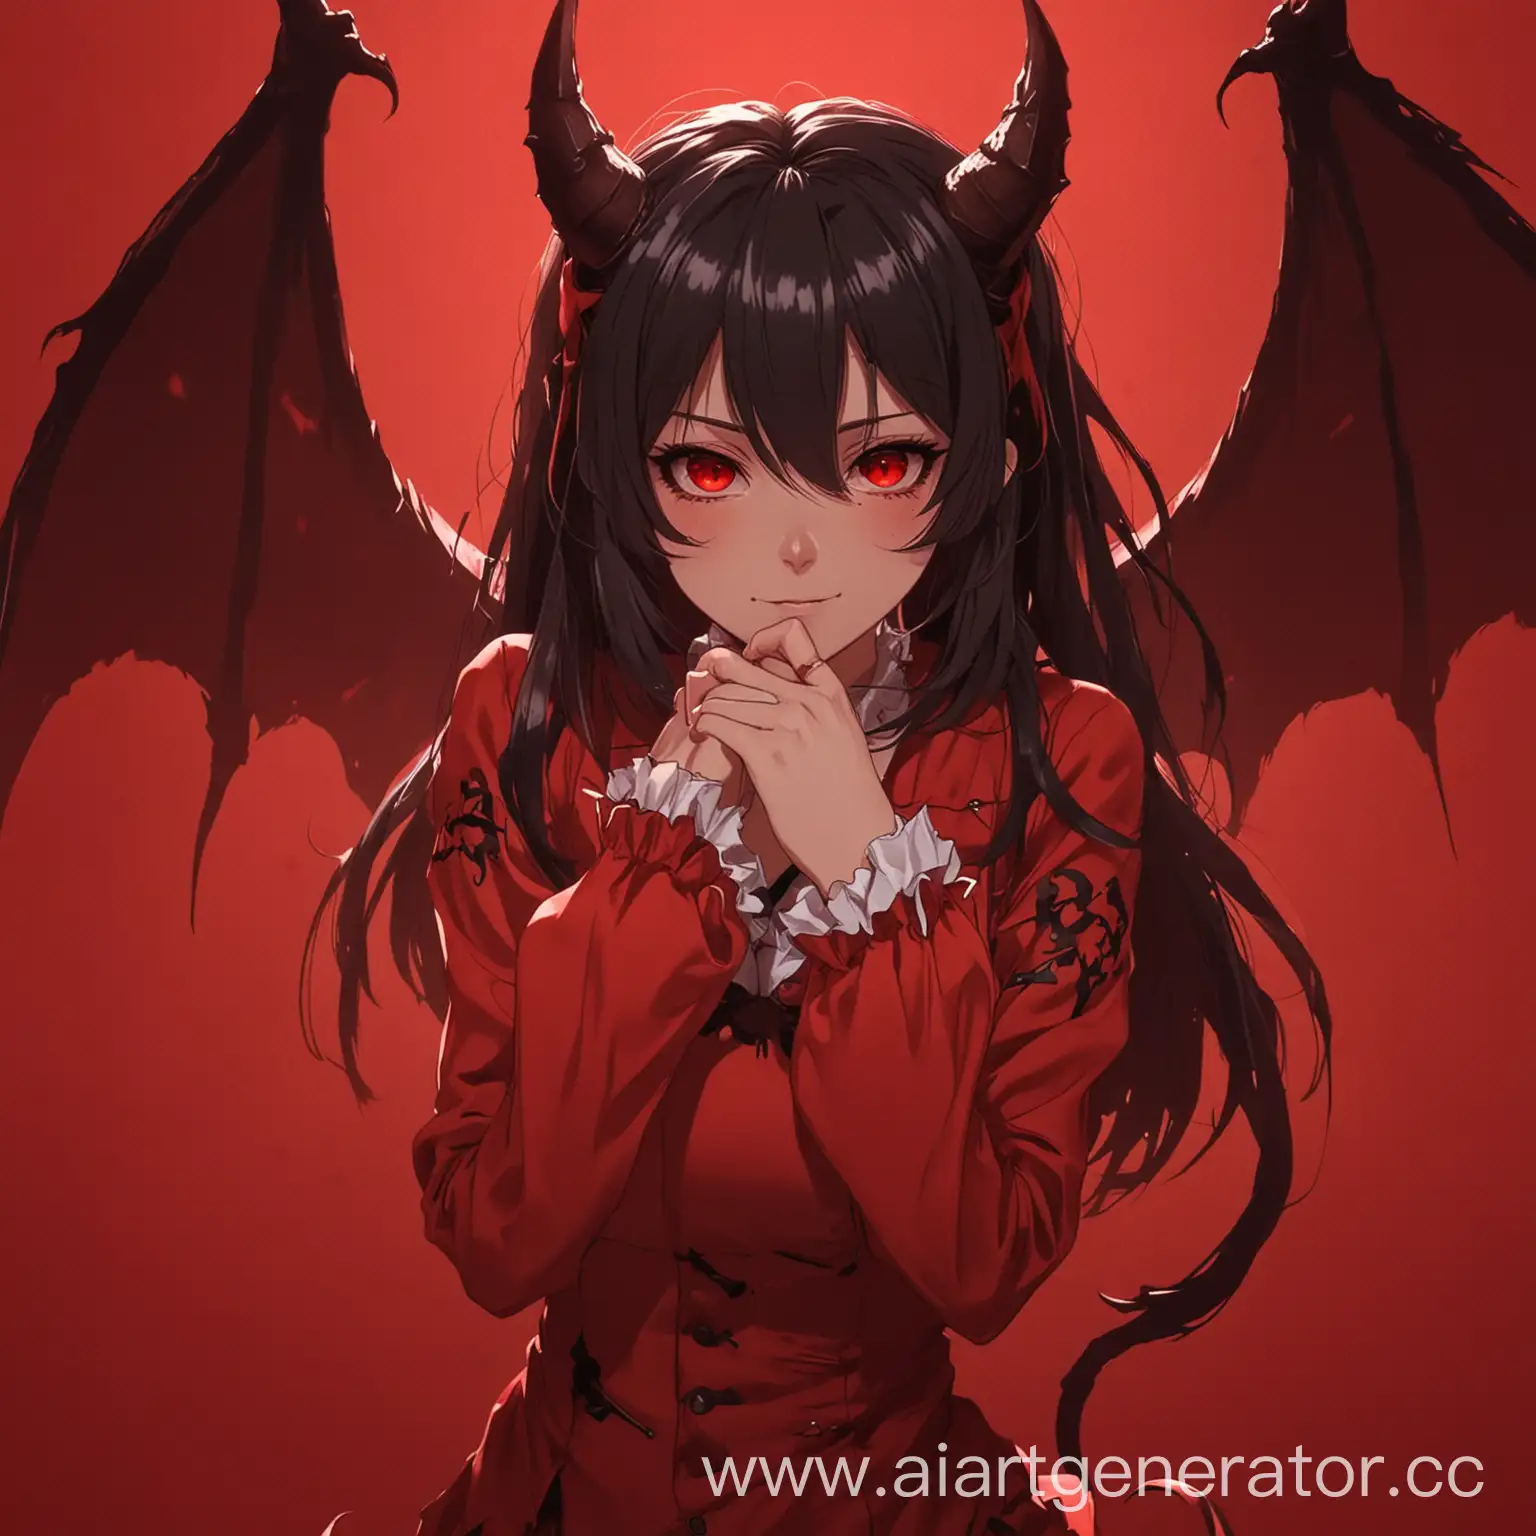 Cute-Anime-Devil-Girl-on-Fiery-Red-Background